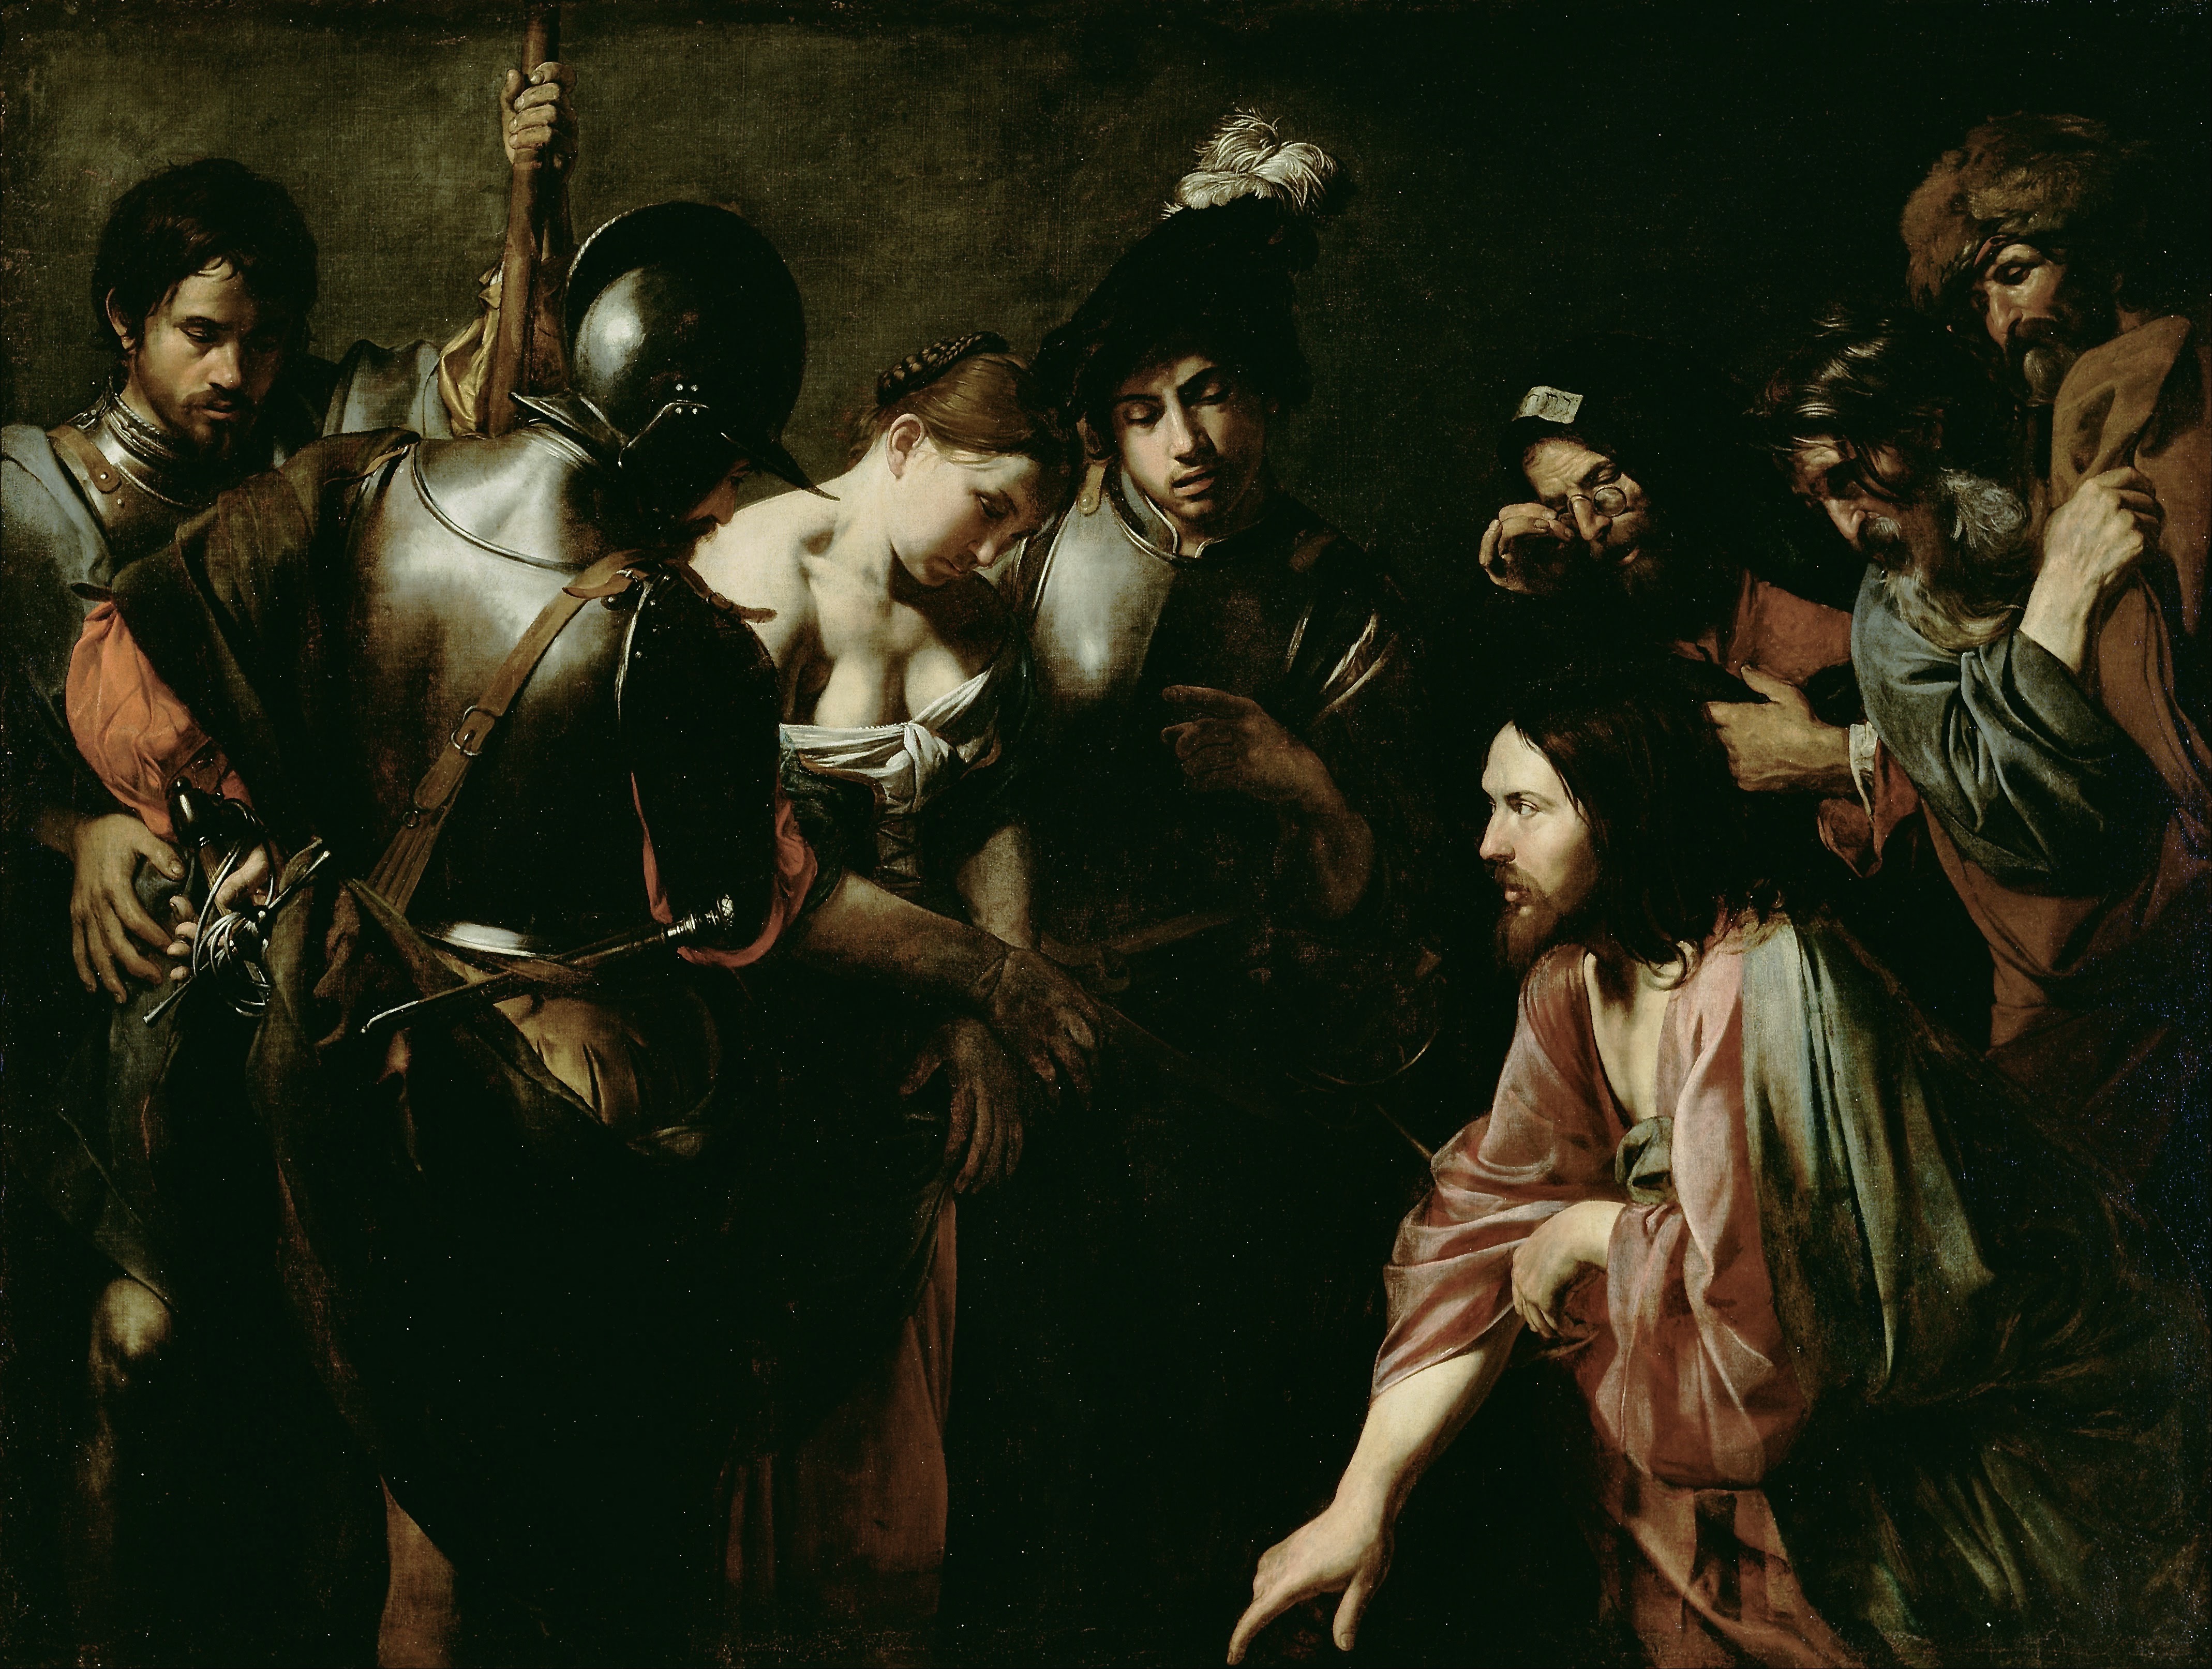 Valentin_de_Boulogne_-_Christ_and_the_Adulteress_-_Google_Art_Project